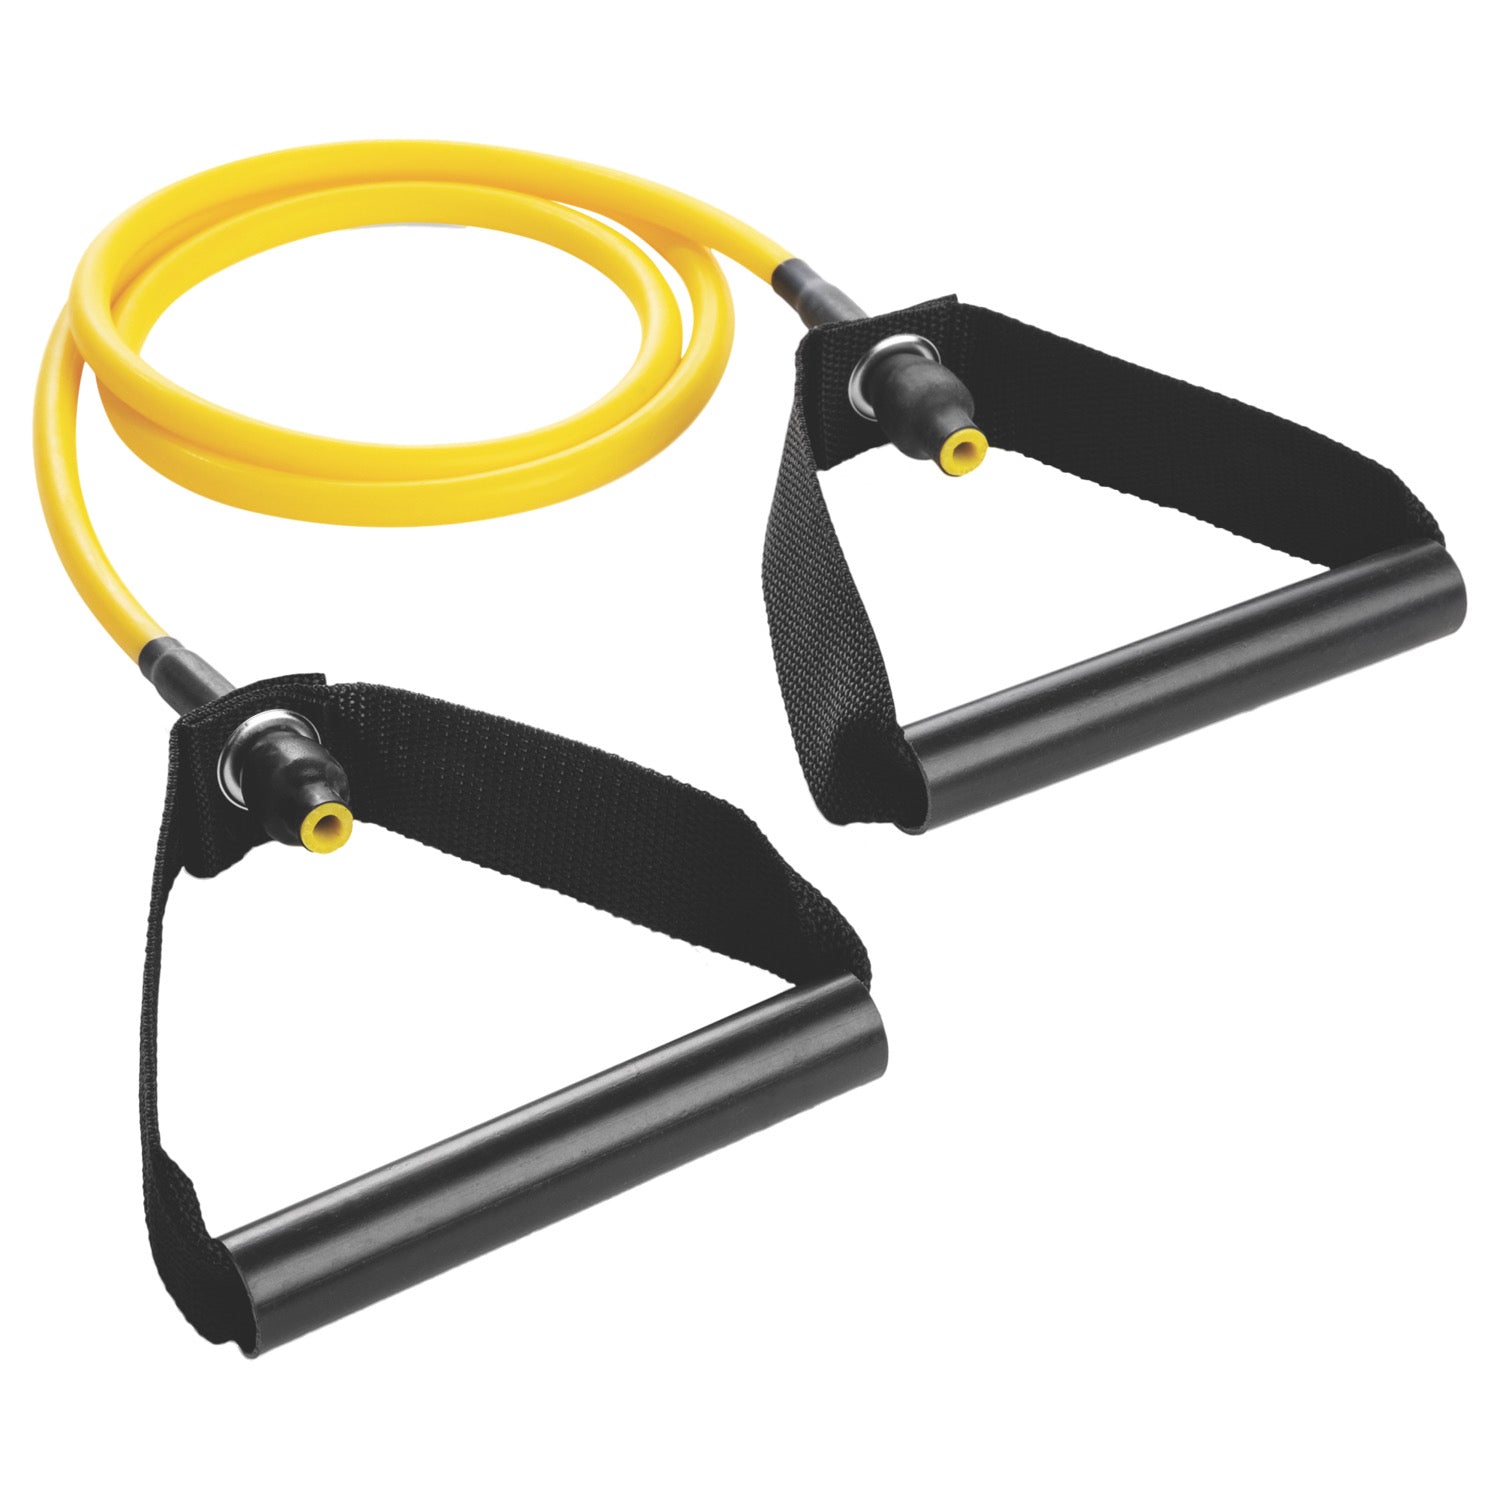 XP Resistance Tubing with PVC Handles Series RHINO Fitness __label:NEW! fitness physical therapy resistance Training tubing